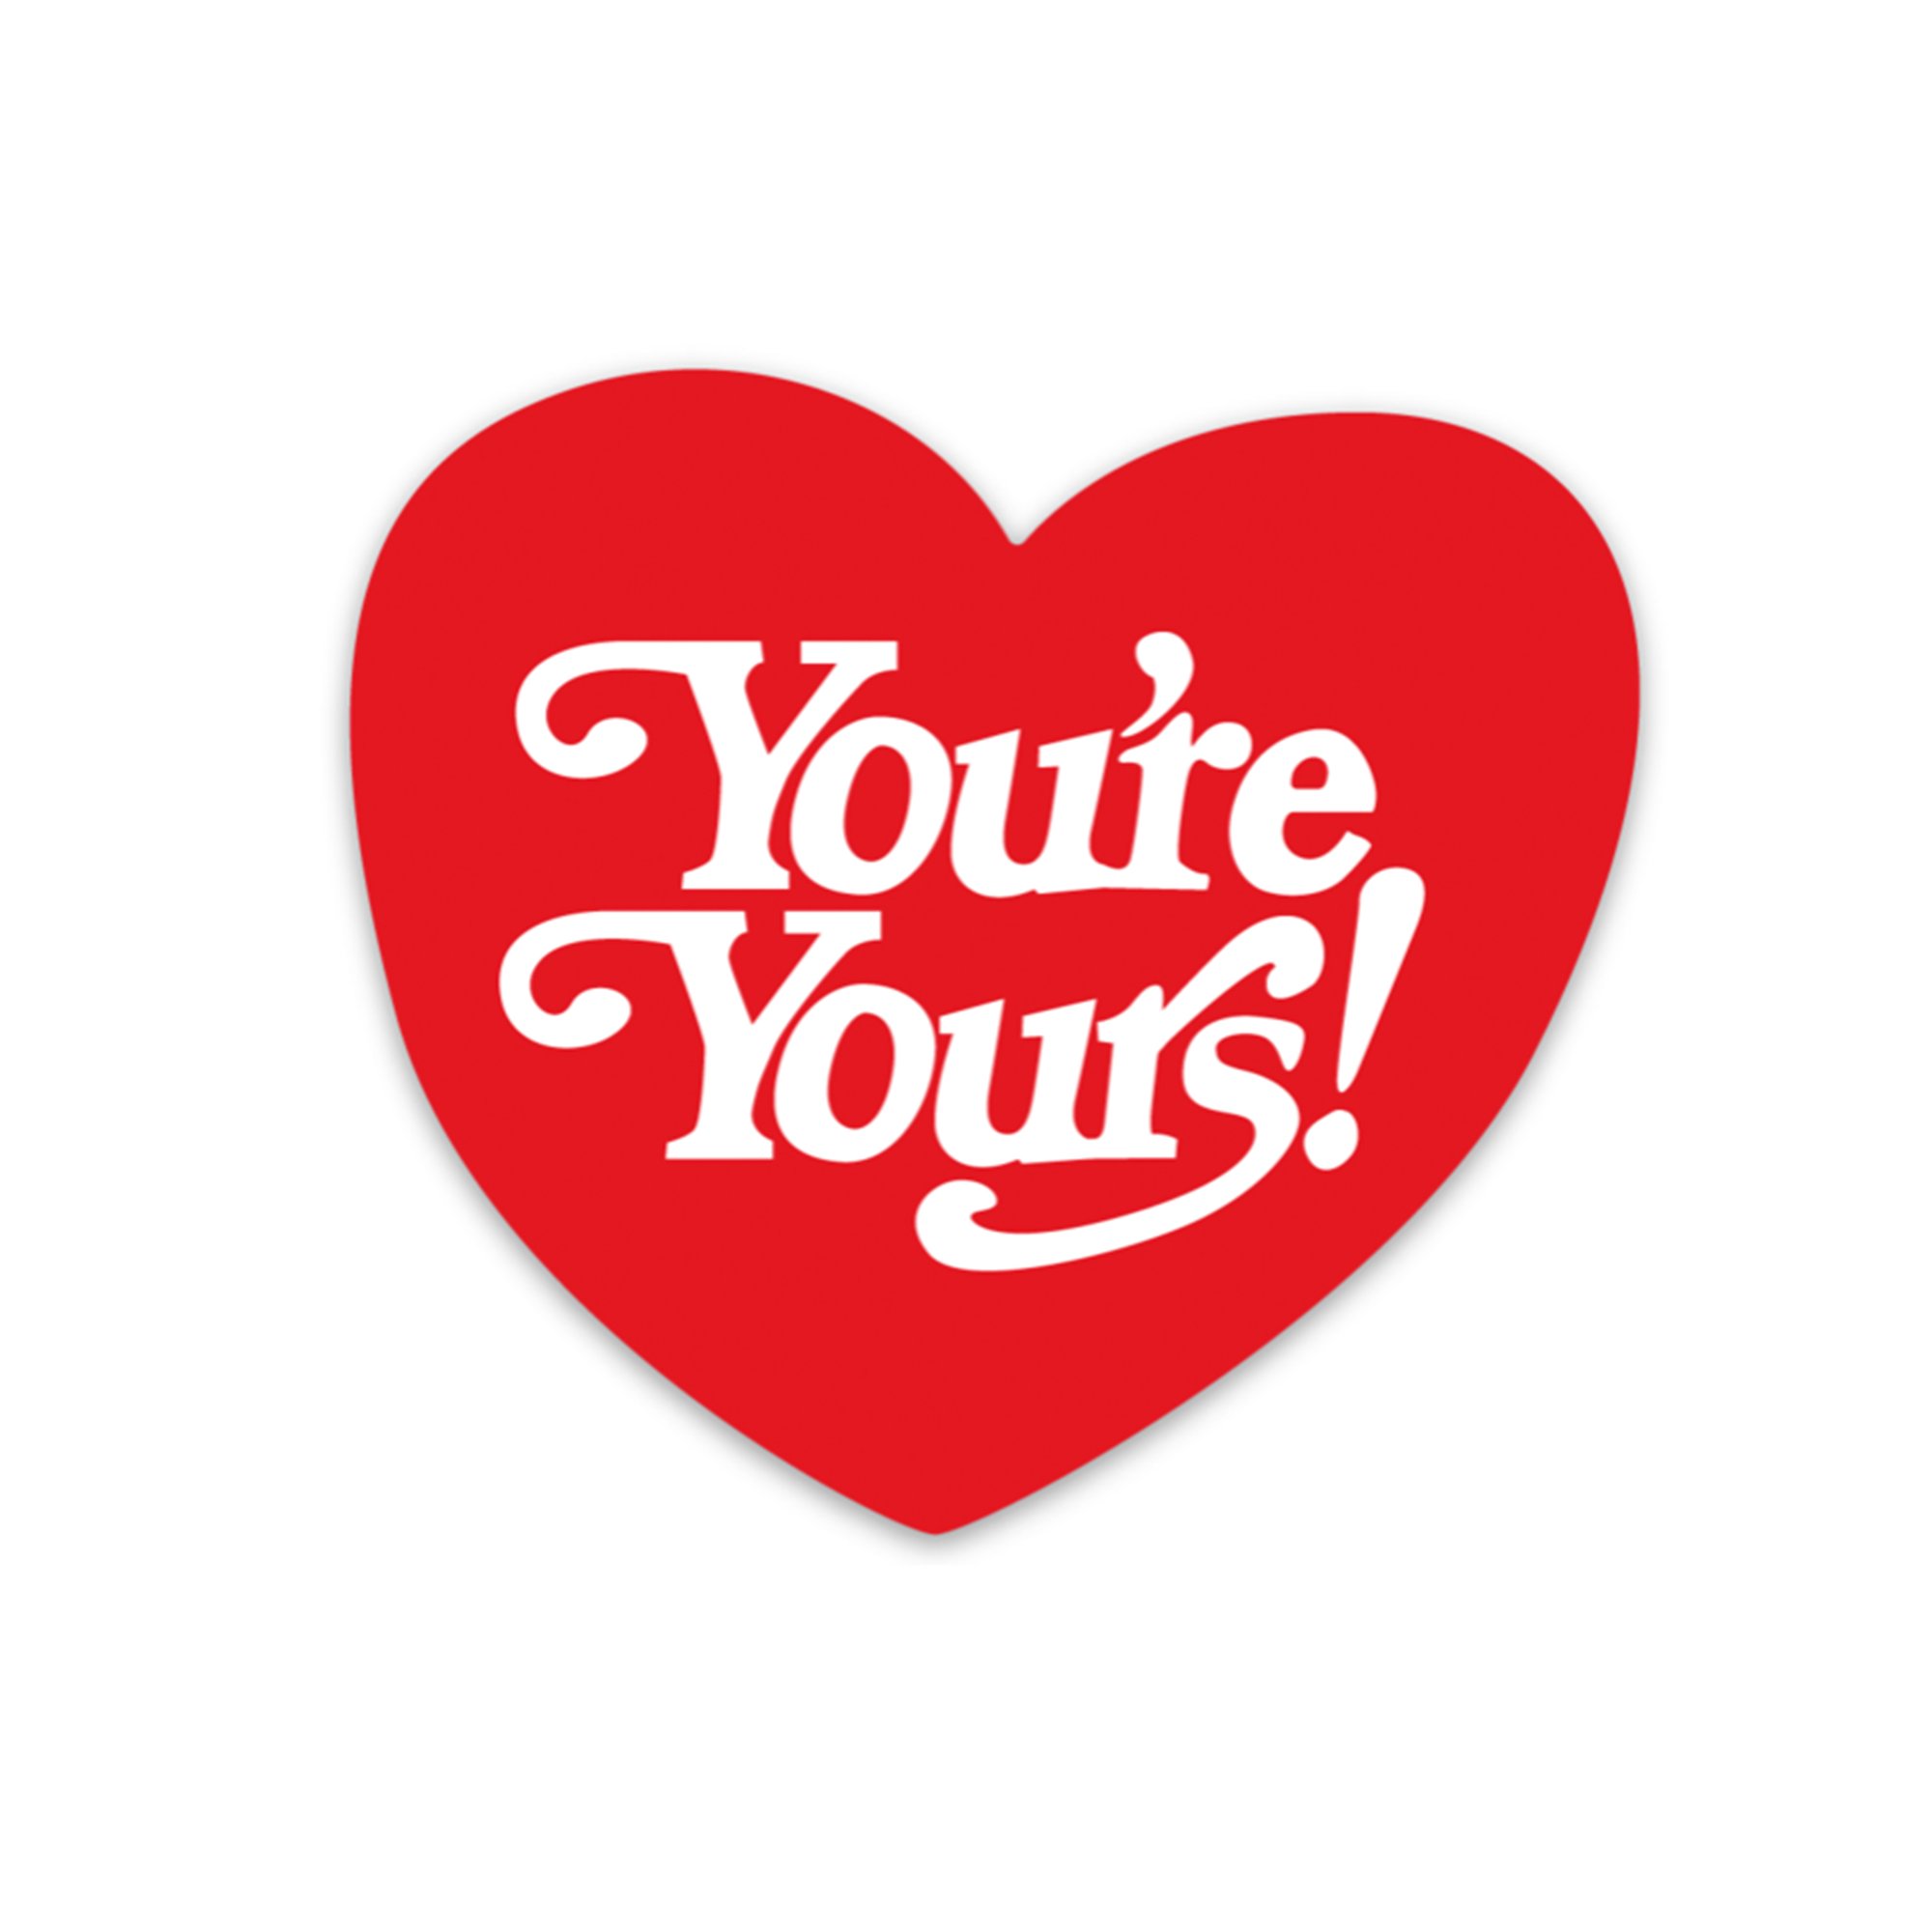 Image of You're Yours